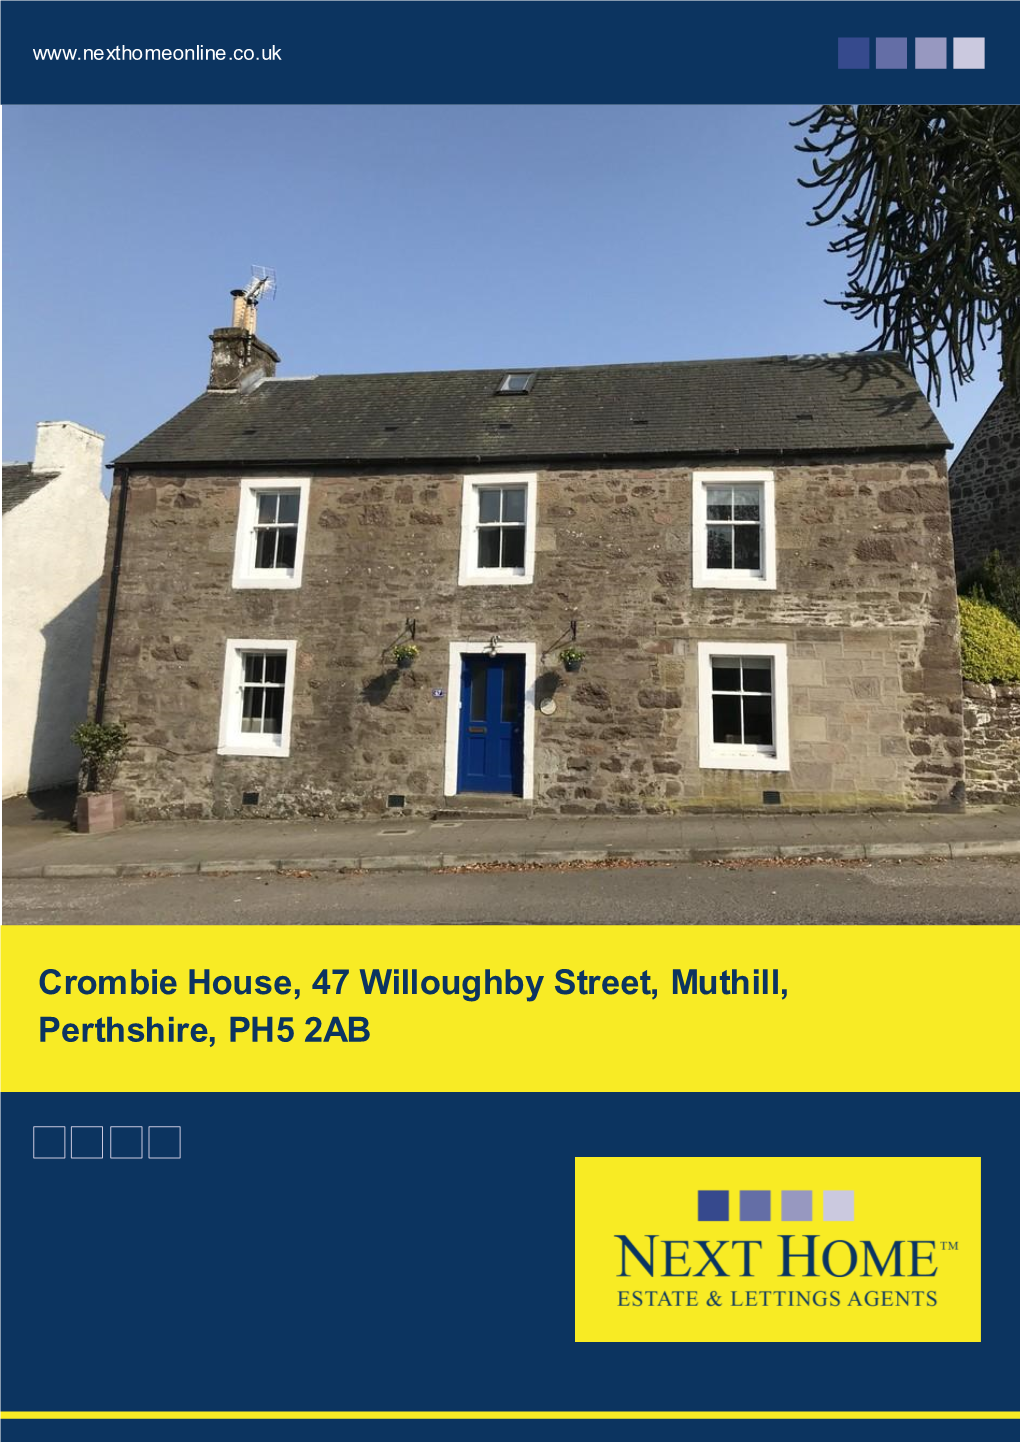 Crombie House, 47 Willoughby Street, Muthill, Perthshire, PH5 2AB Offers Over £270,000